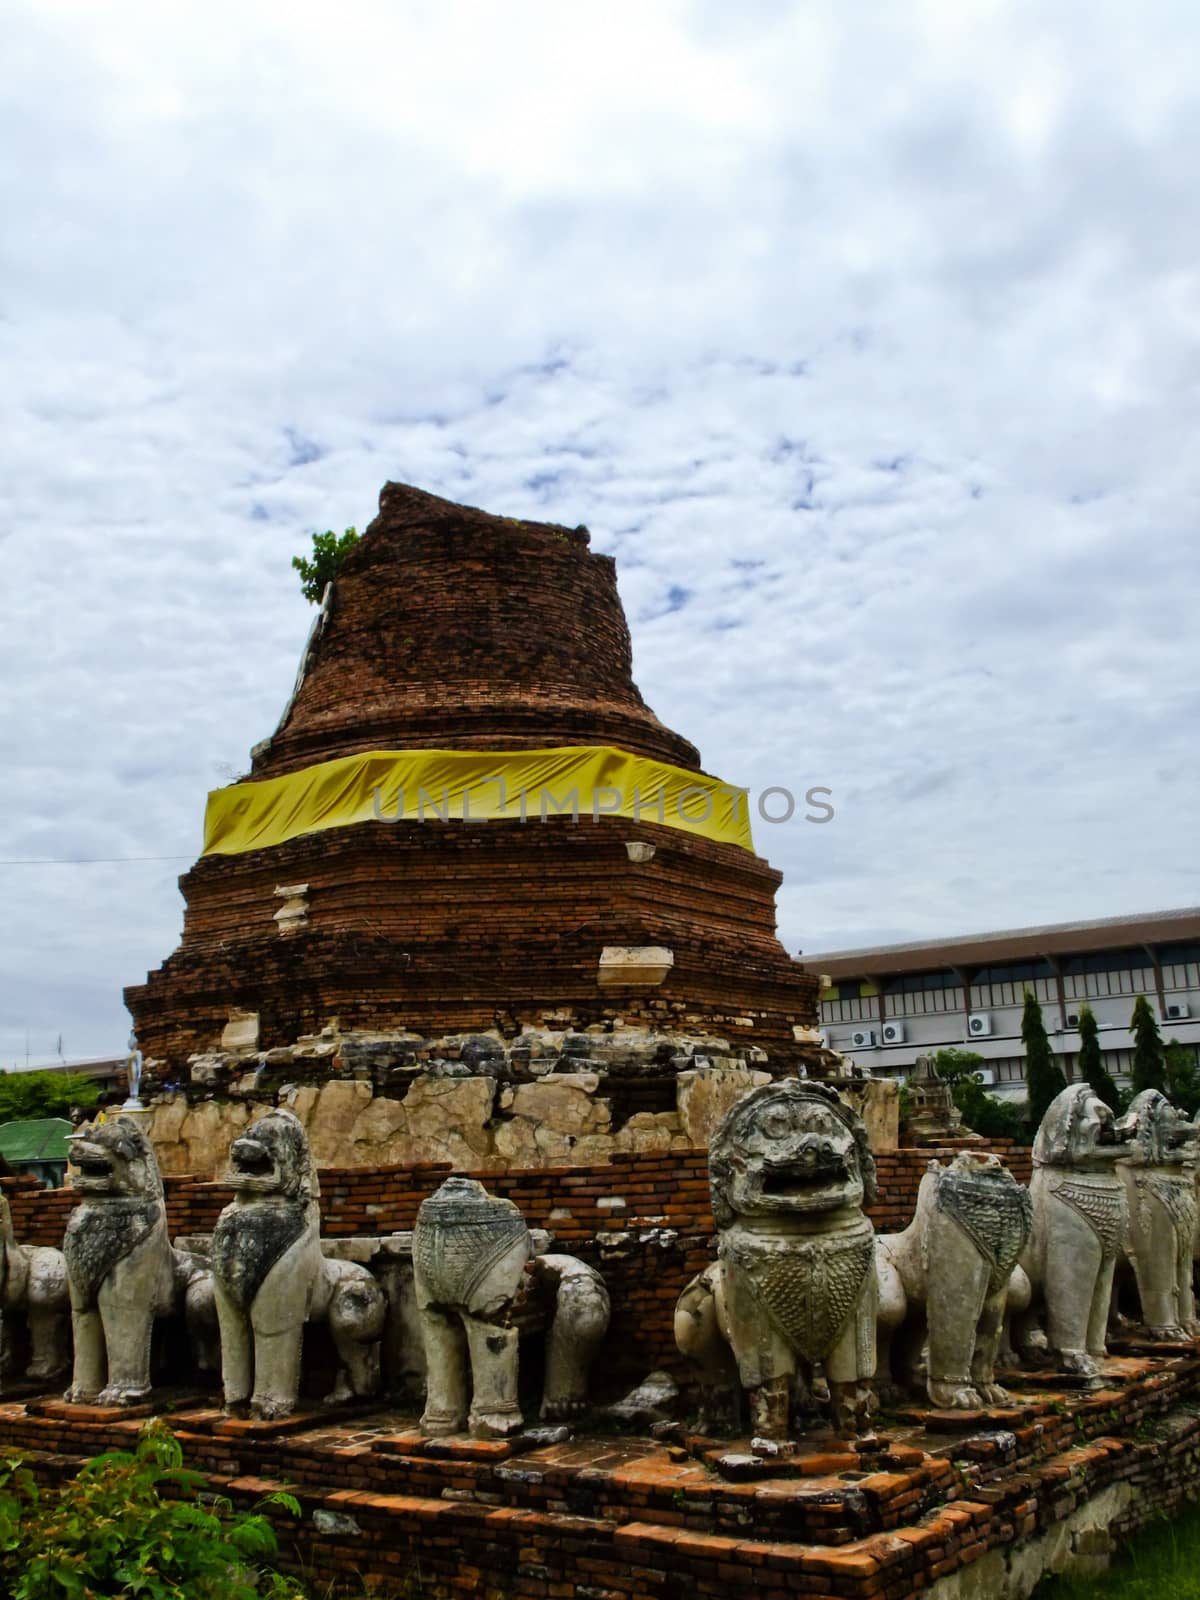 An ancient buddhist pagoda with elephant stone statues in Ayutth by gururugu